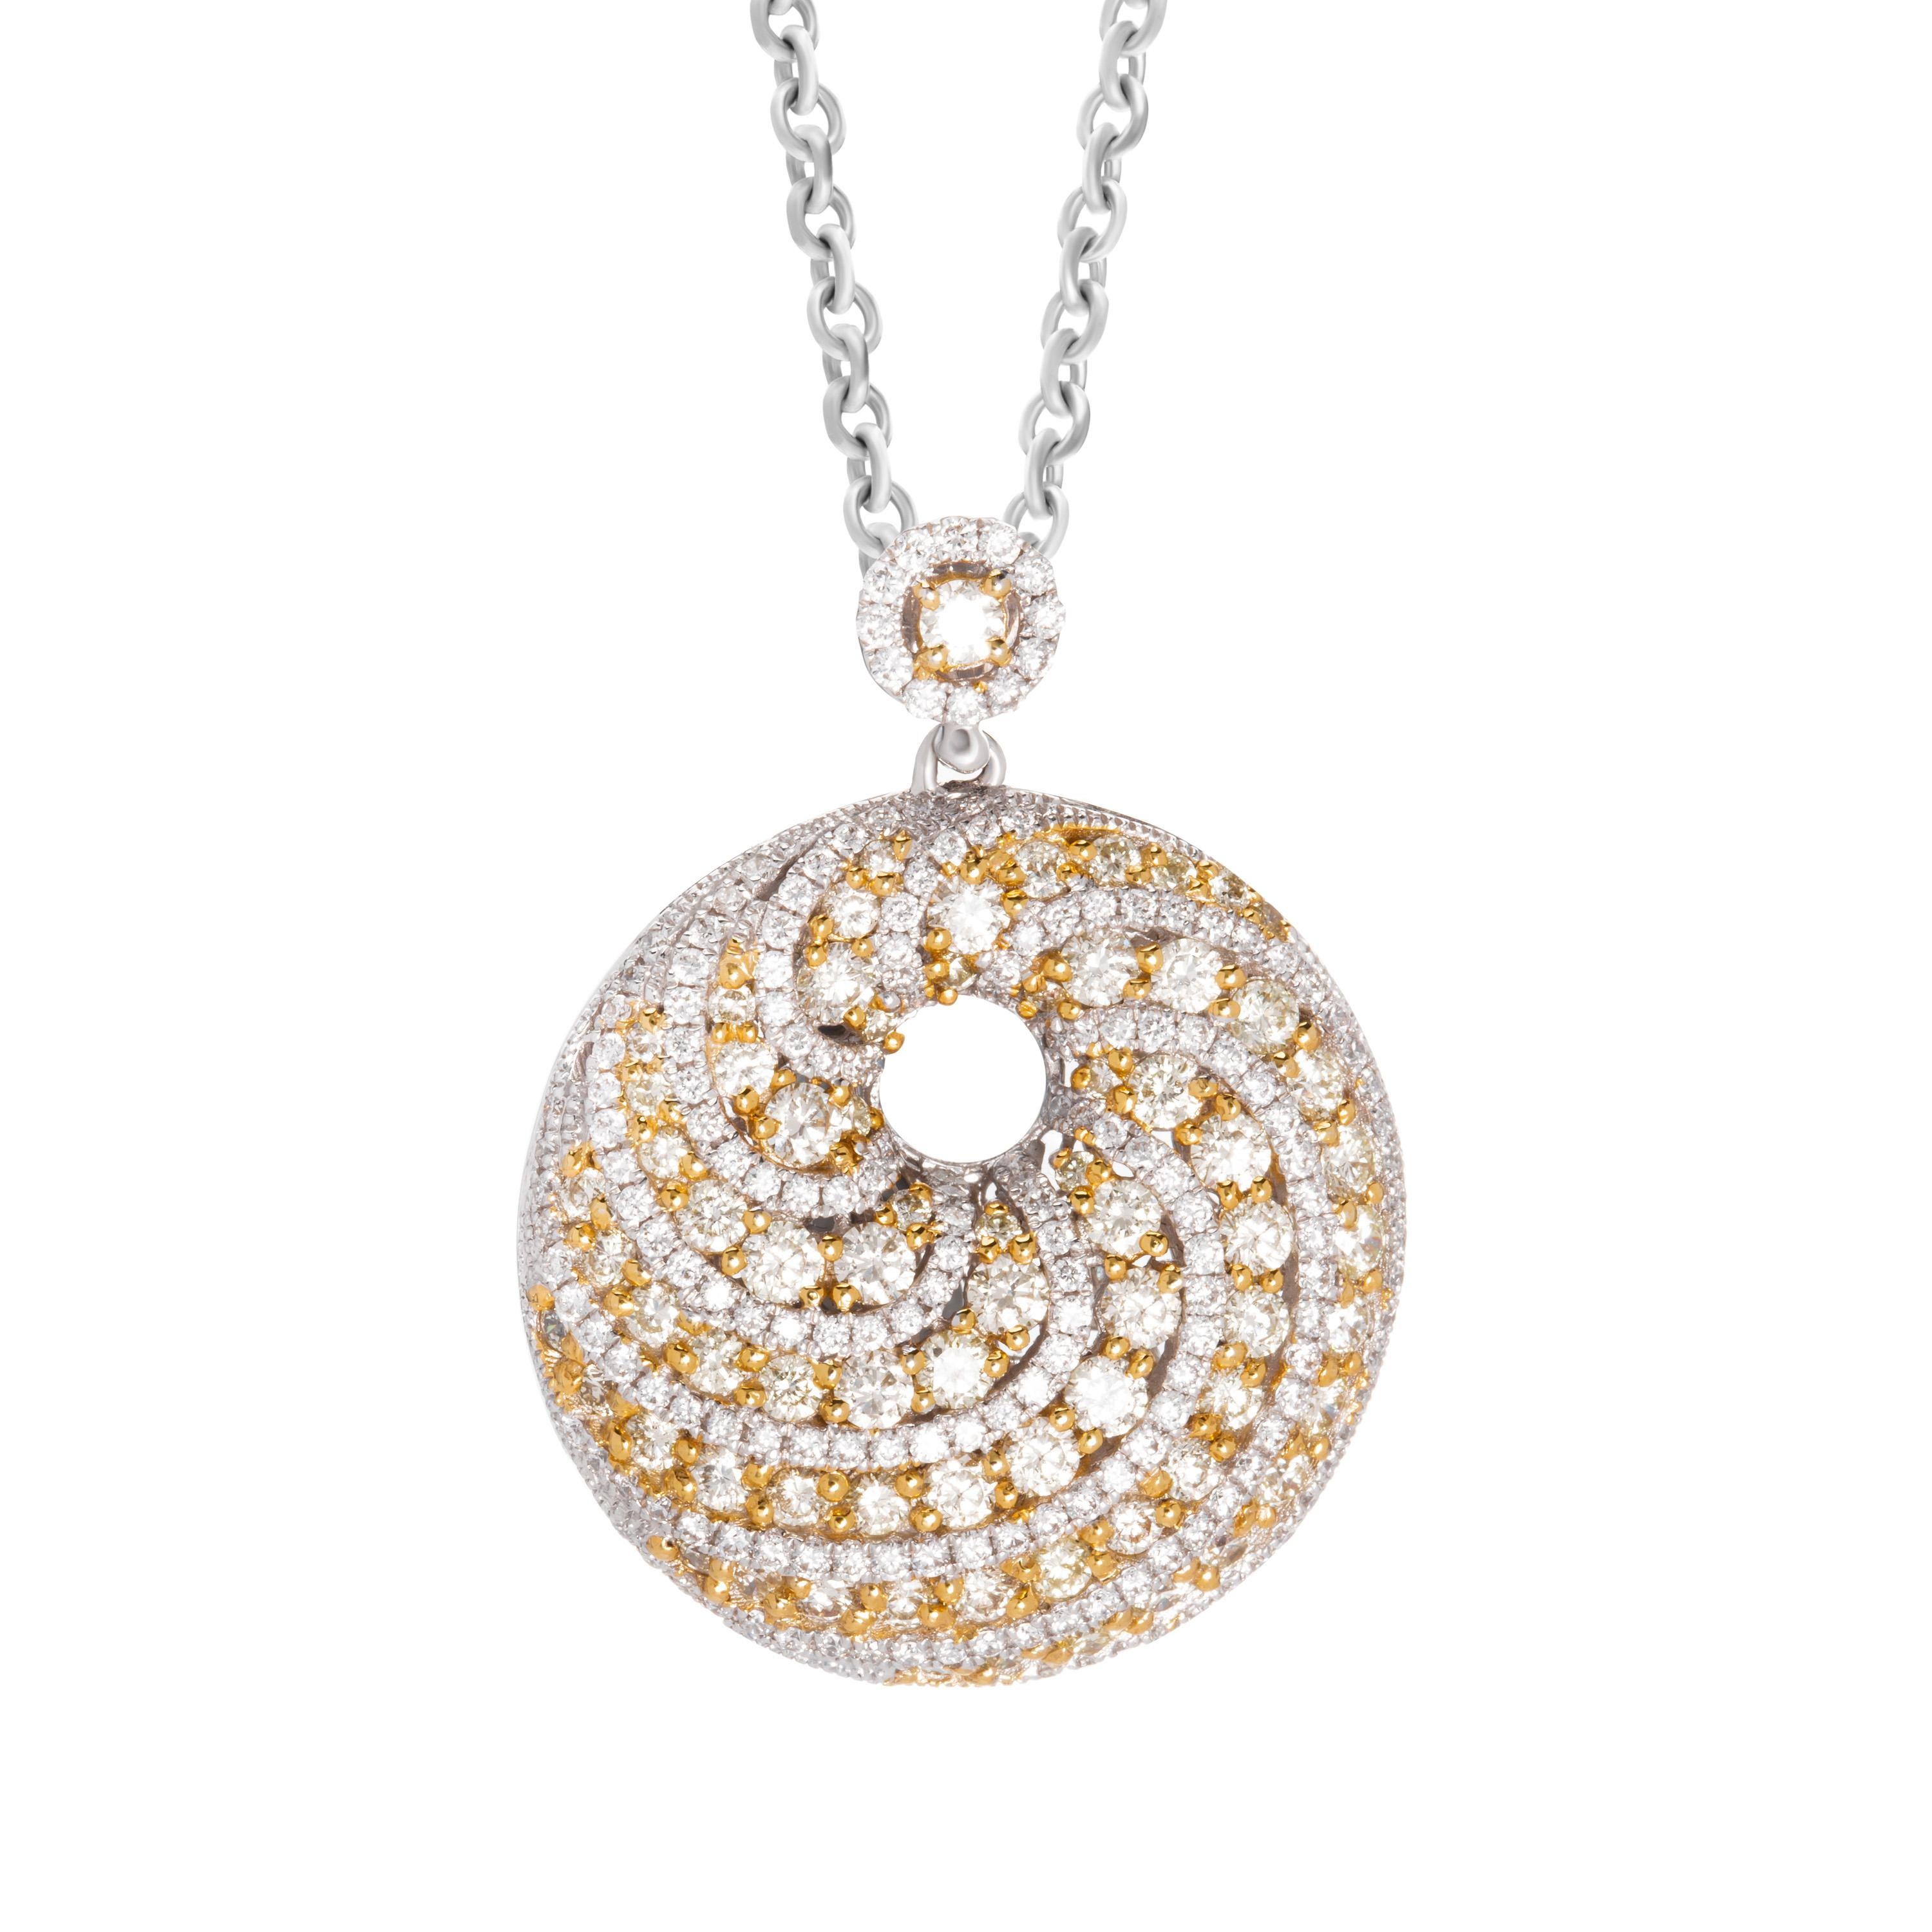 Butani's pendant is made from 18-karat white gold and encrusted with 2.07 carats of radiant yellow and white diamonds in a swirl bombe design.  Pendant diameter 2.2cm.  This pendant doesn't come with a chain.  For a chain to match, please contact